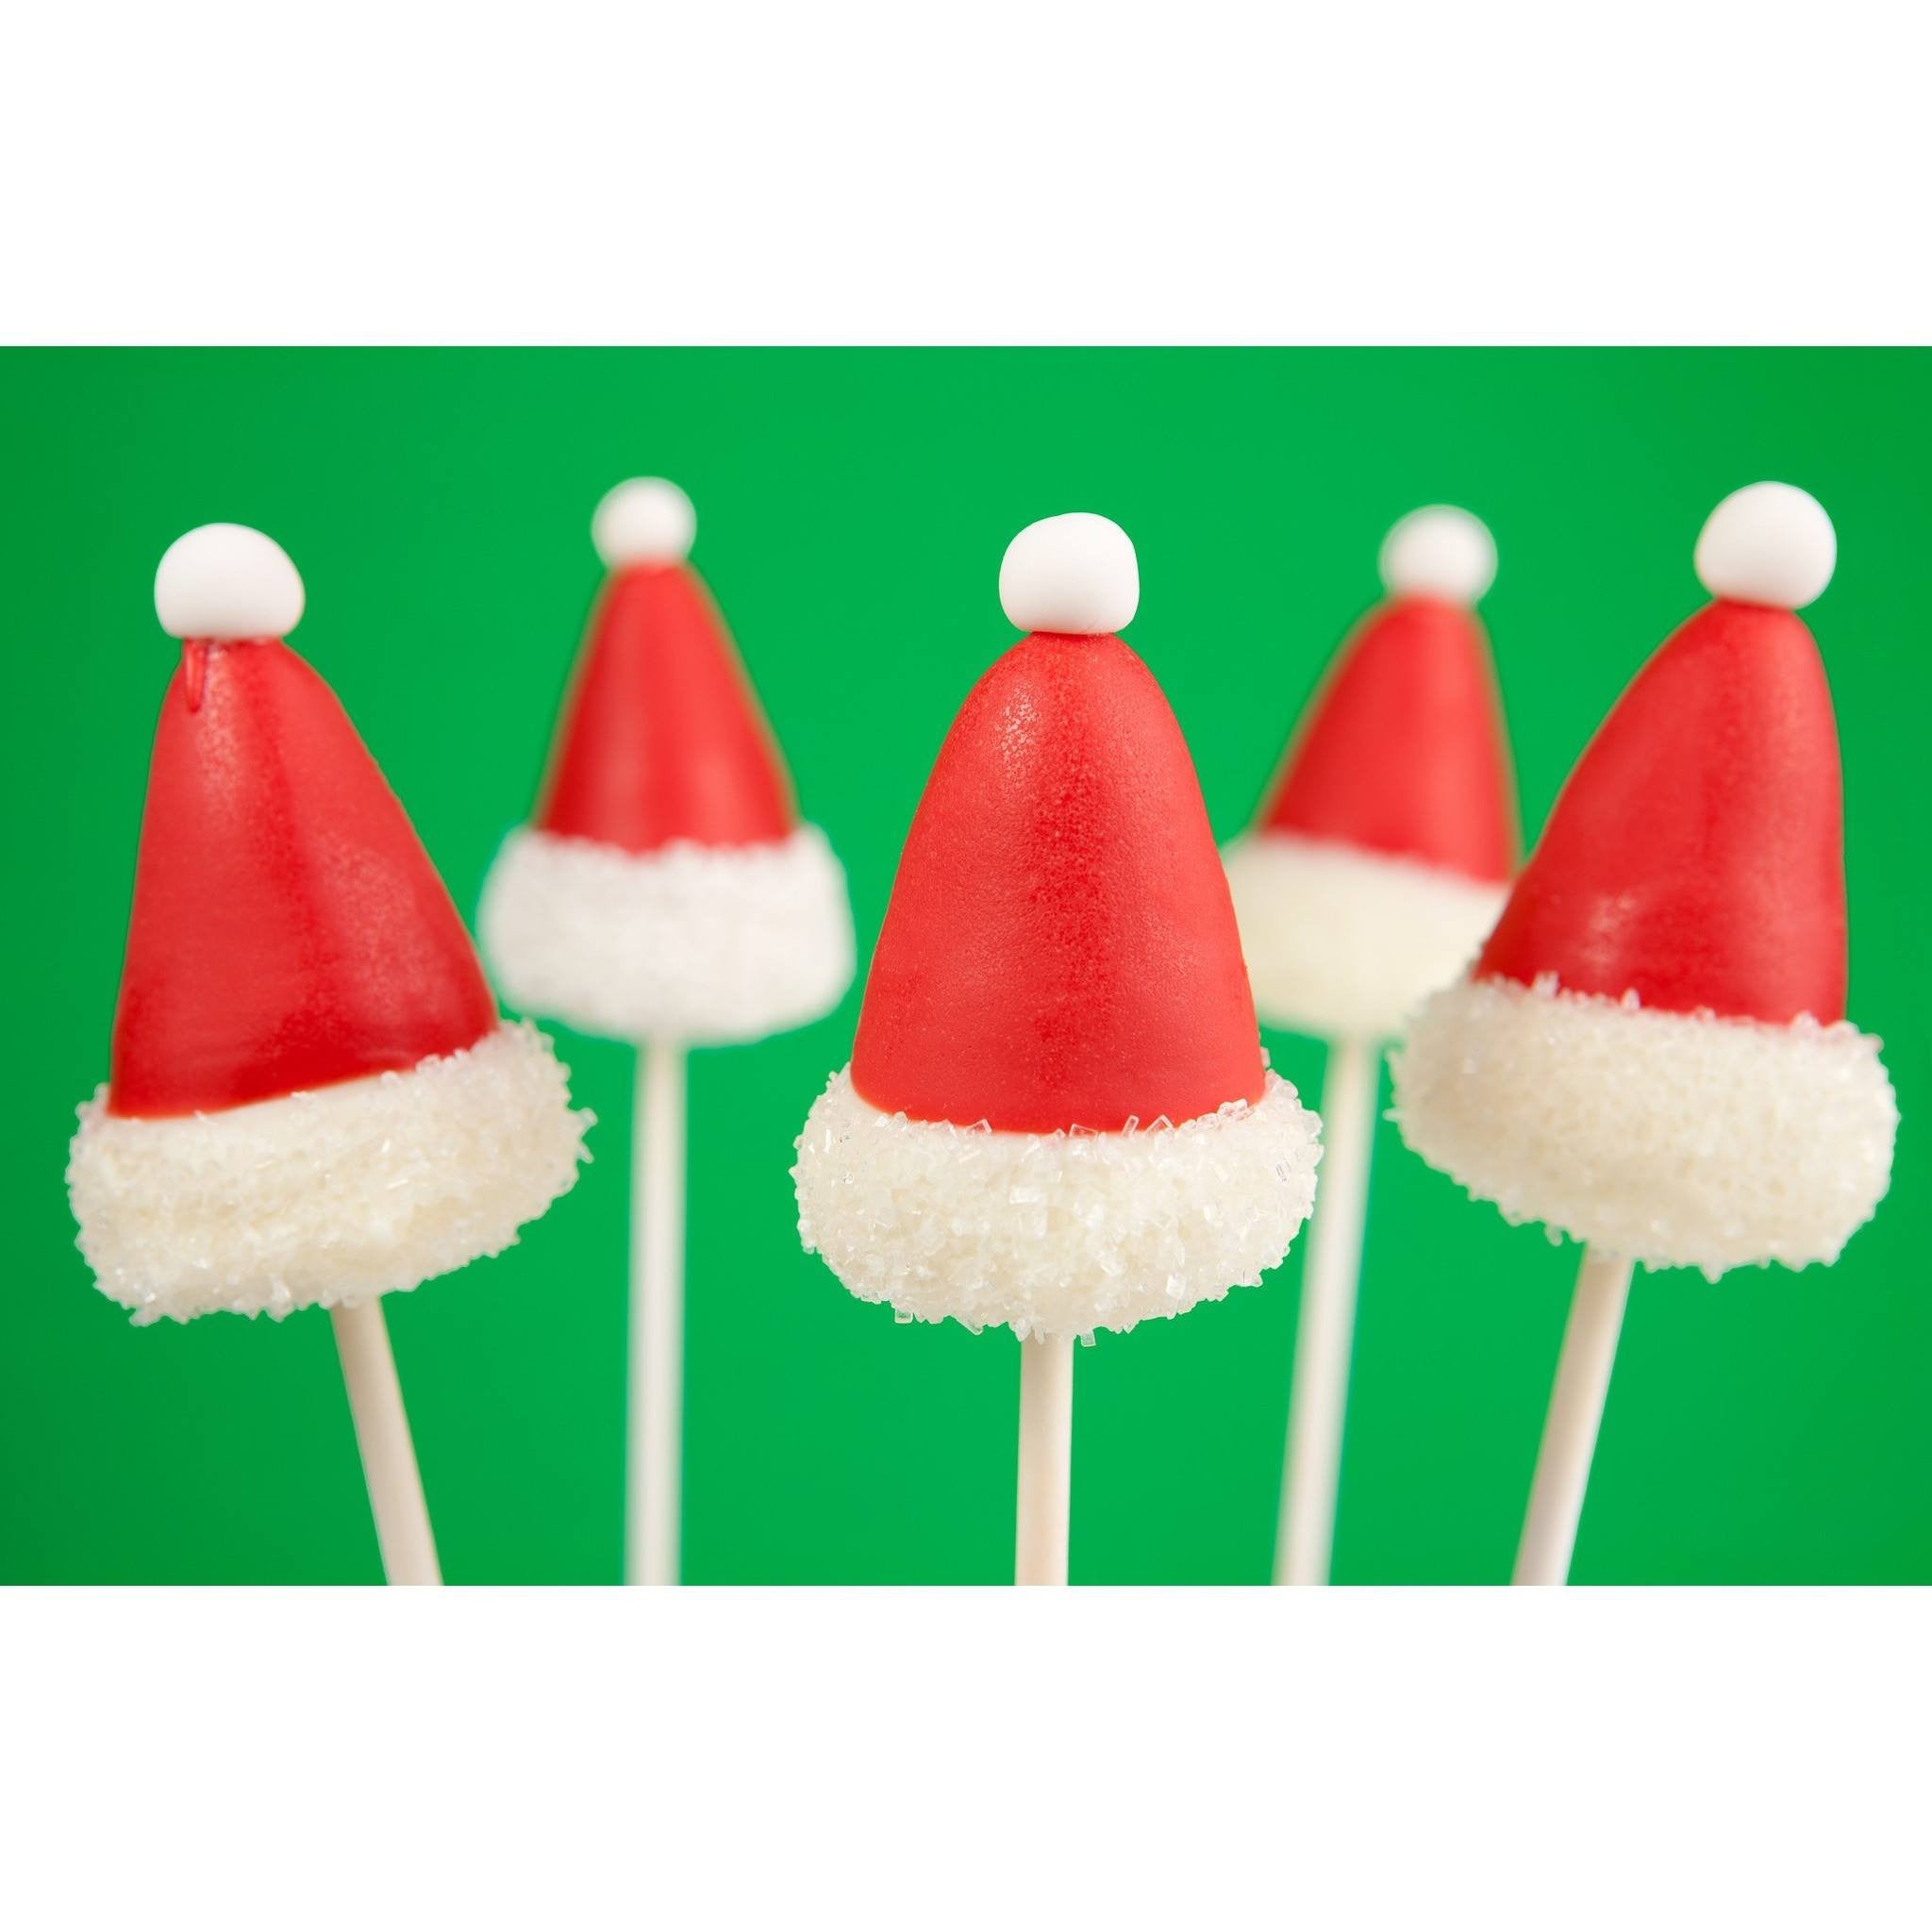 Santa Hat Chocolate Cakes - Lose Baby Weight